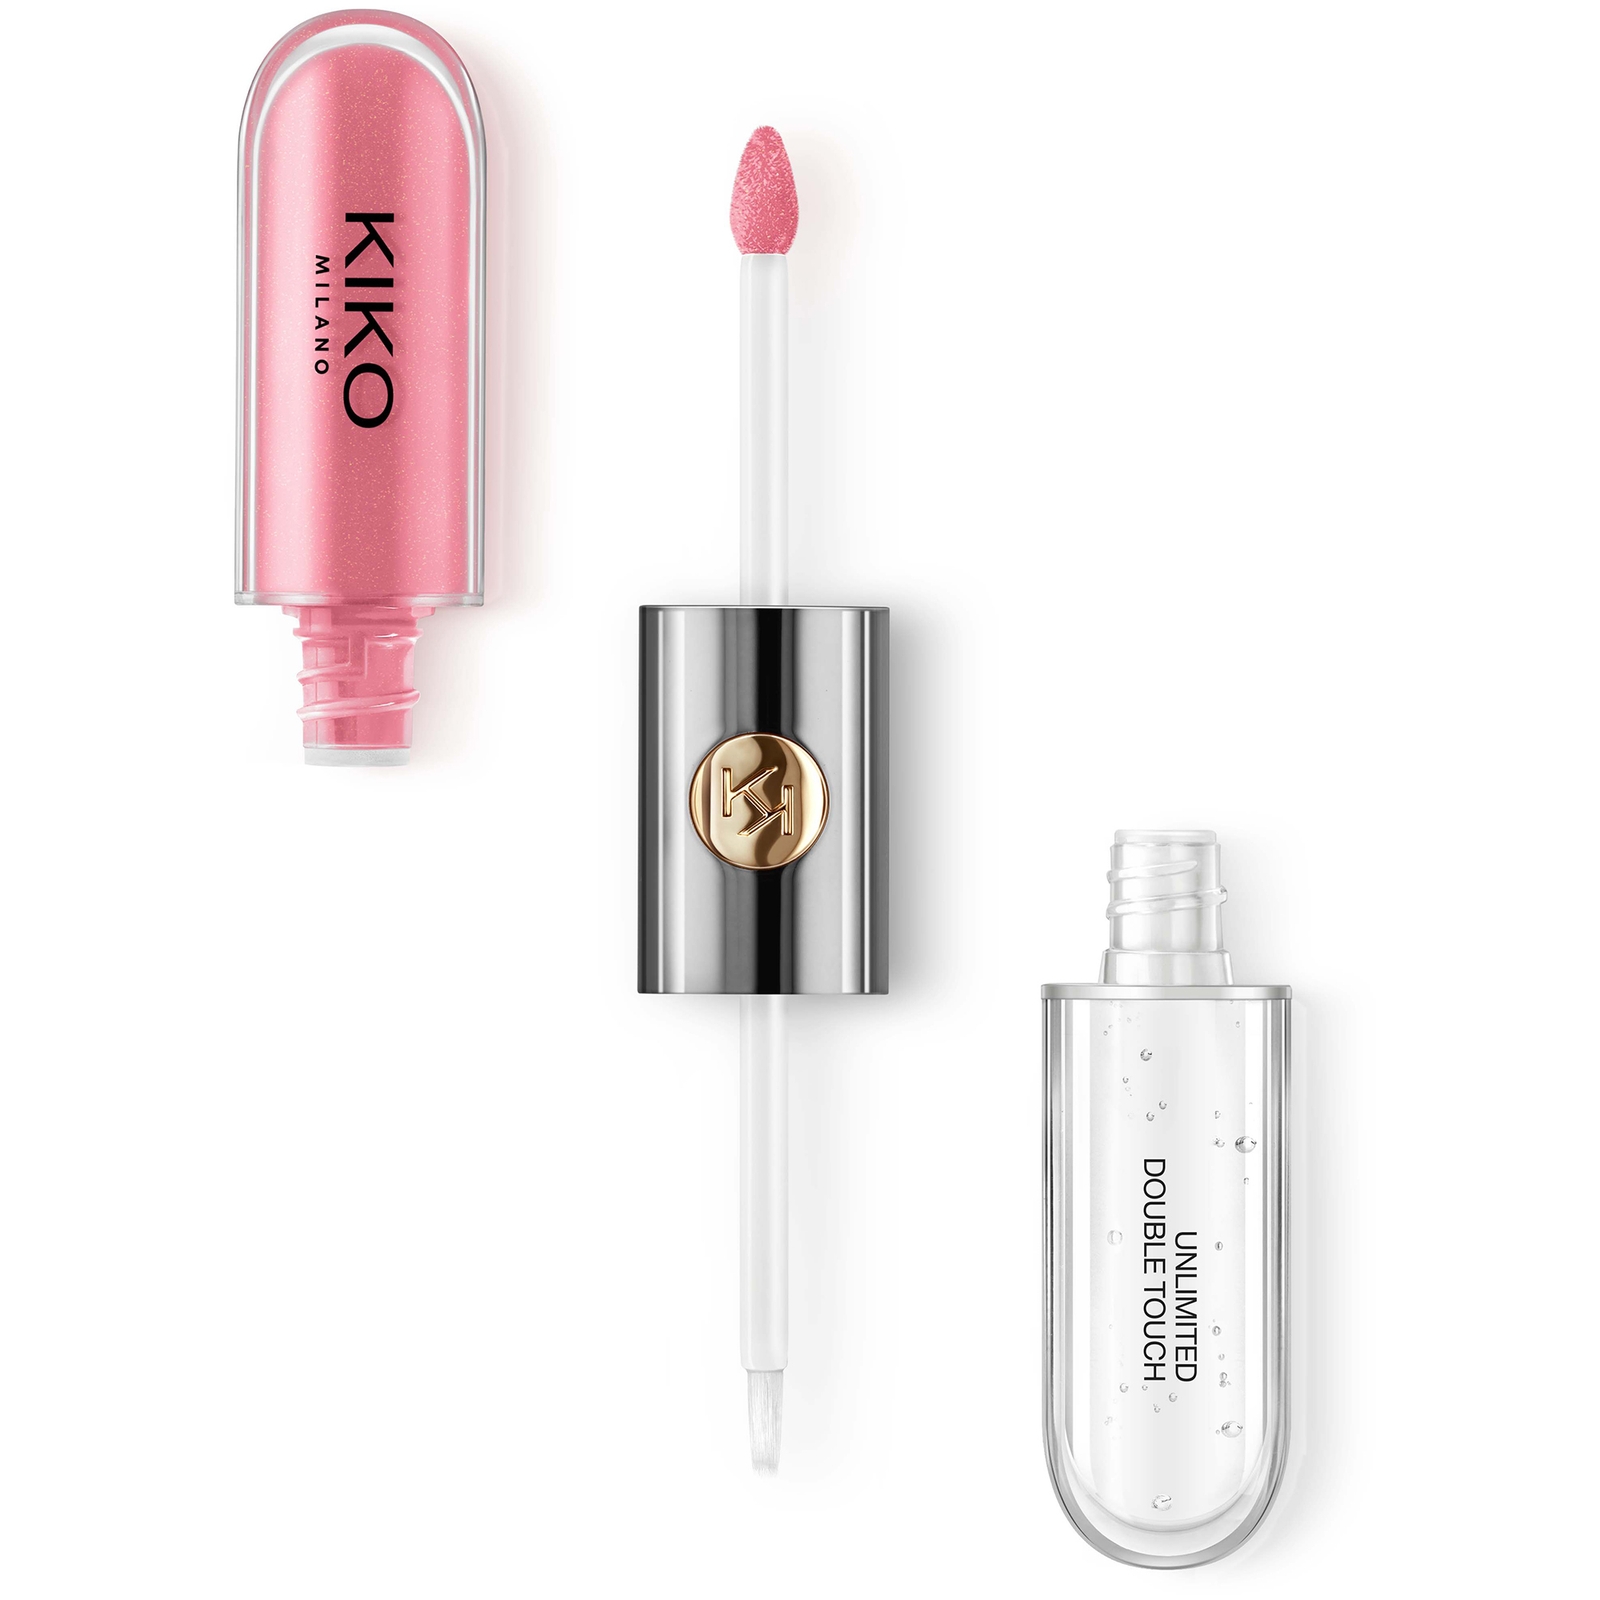 KIKO Milano Unlimited Double Touch 6ml (Various Shades) - 111 Satin Pink Camellia